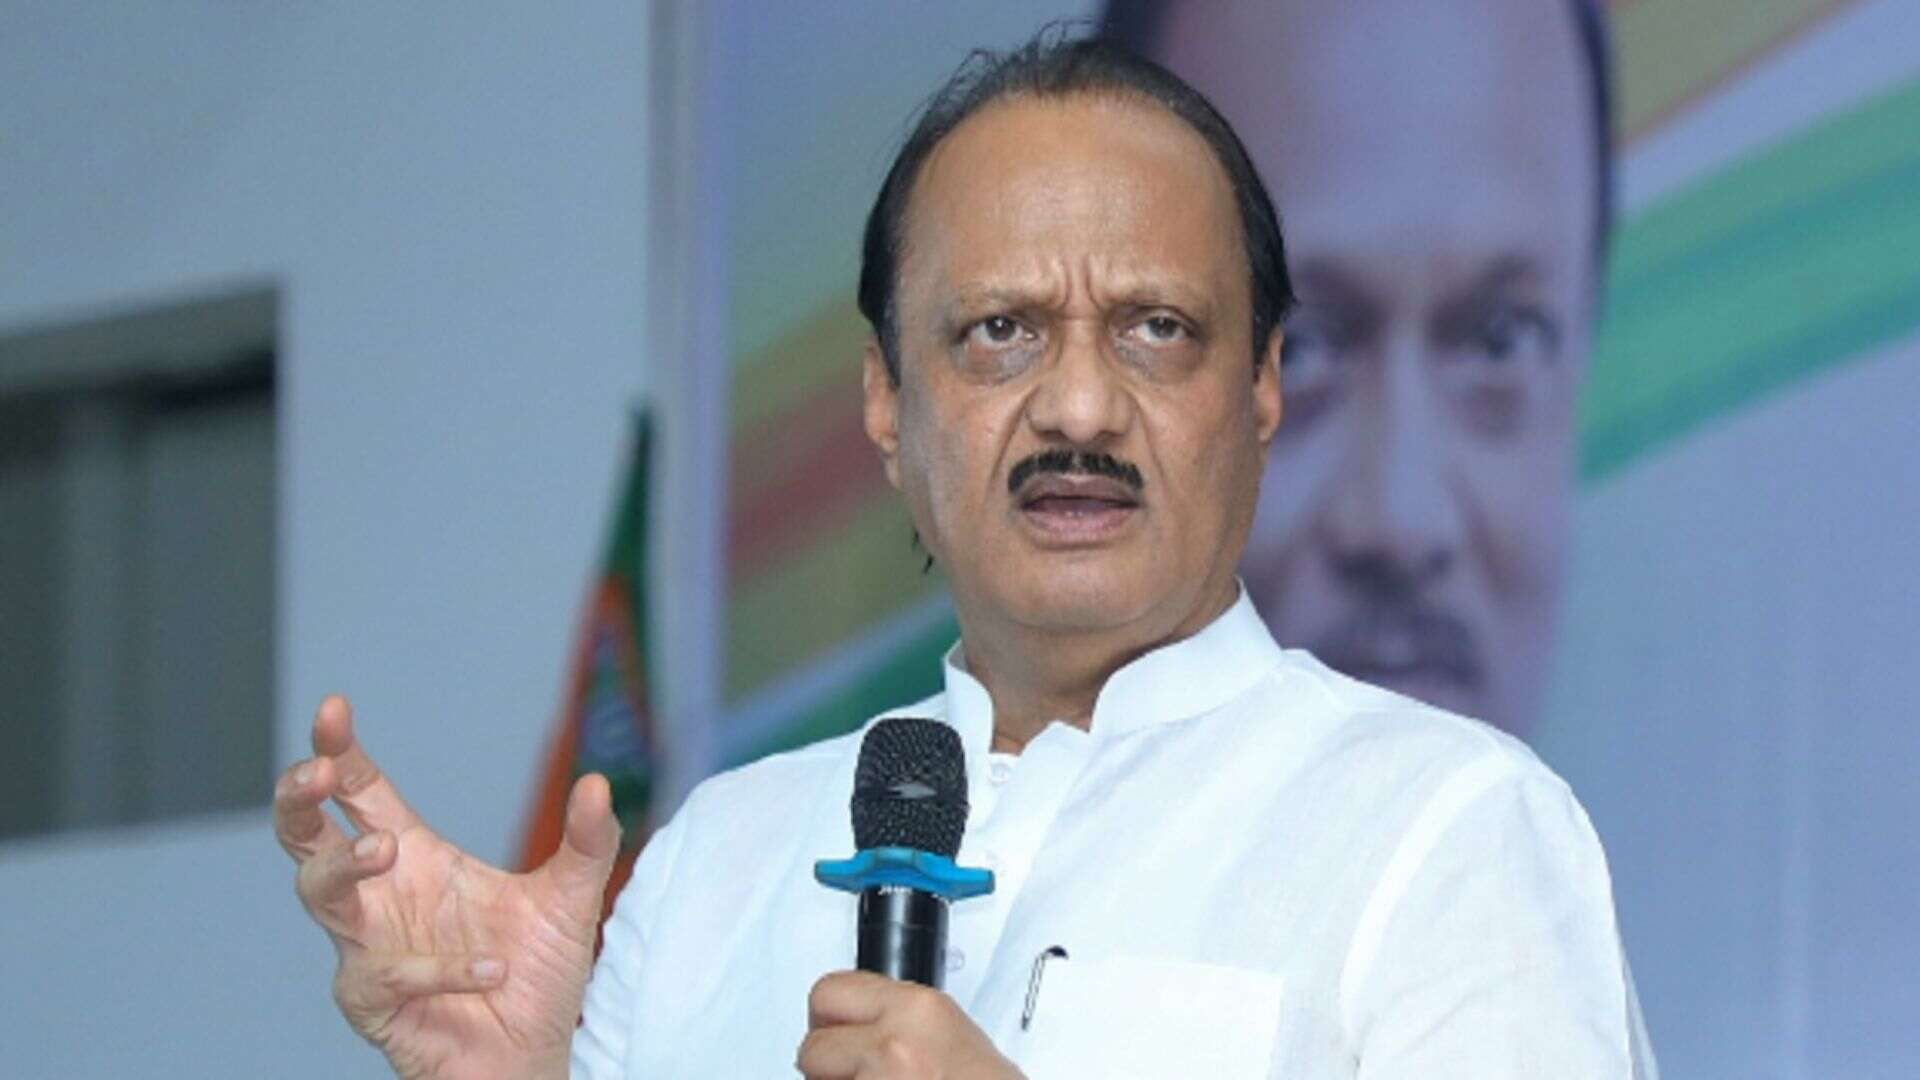 Ajit Pawar To Provide Money For 3 LPG Cylinders To Women With Annual Income Under Rs. 2.5 Lakh